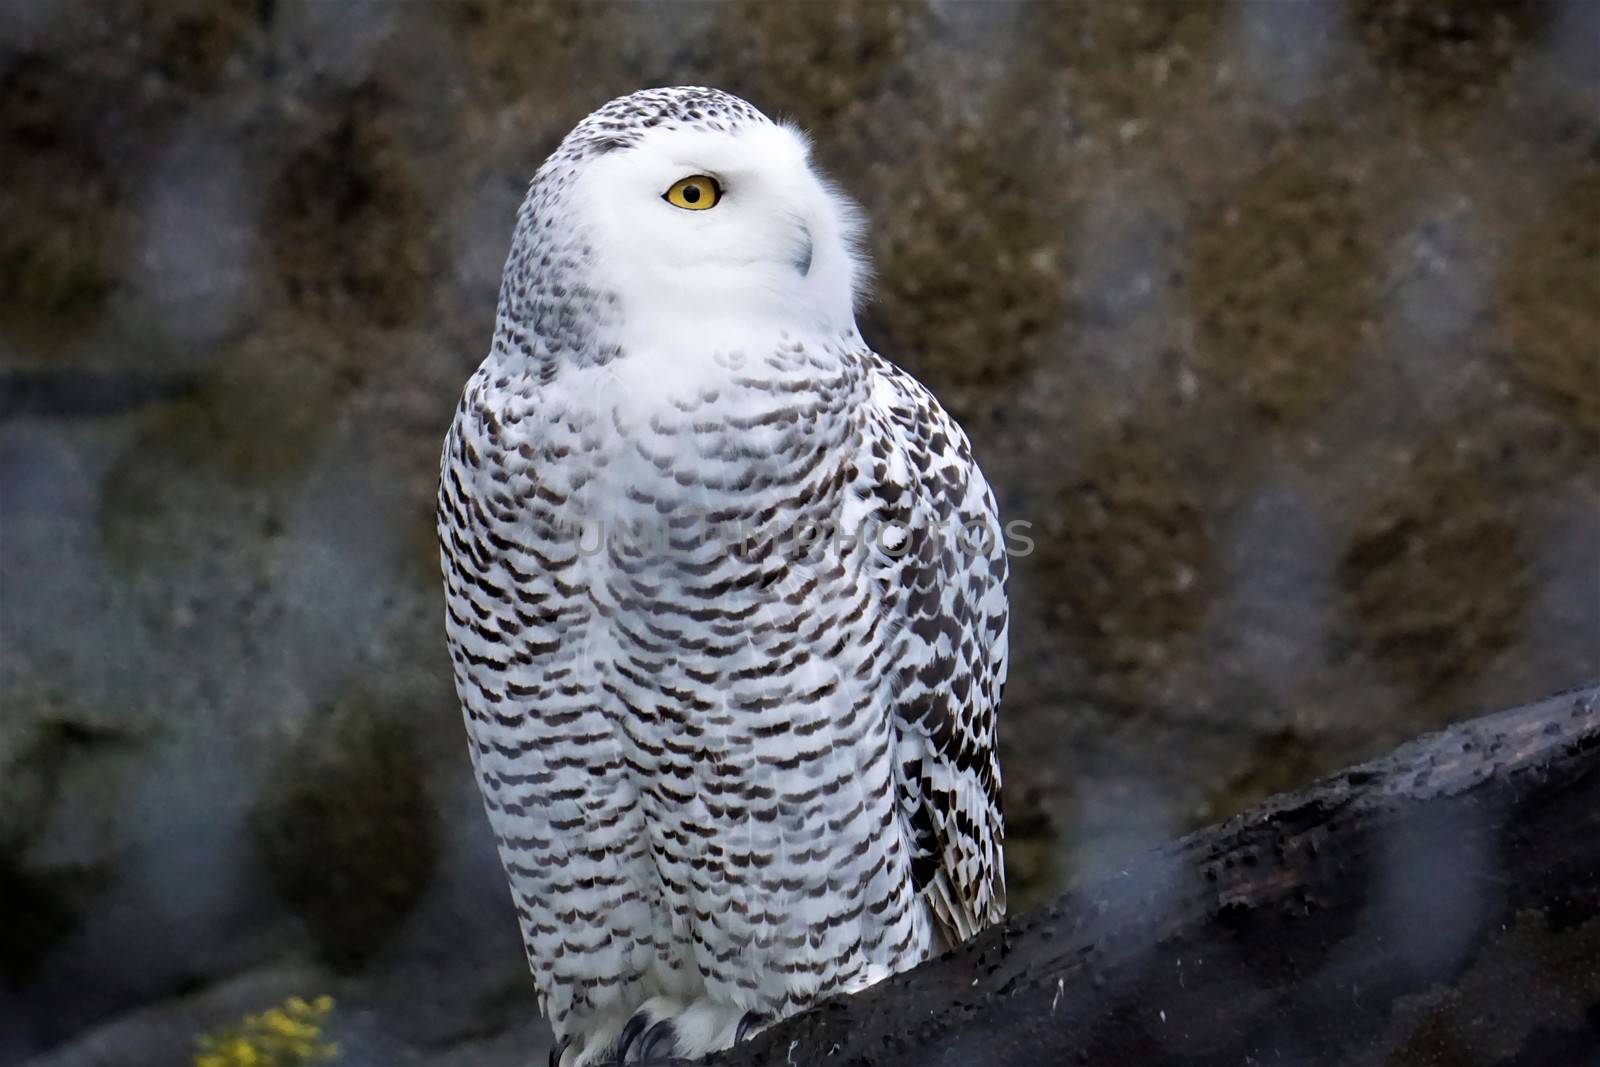 Snowy owl in the zoo looking away by pisces2386